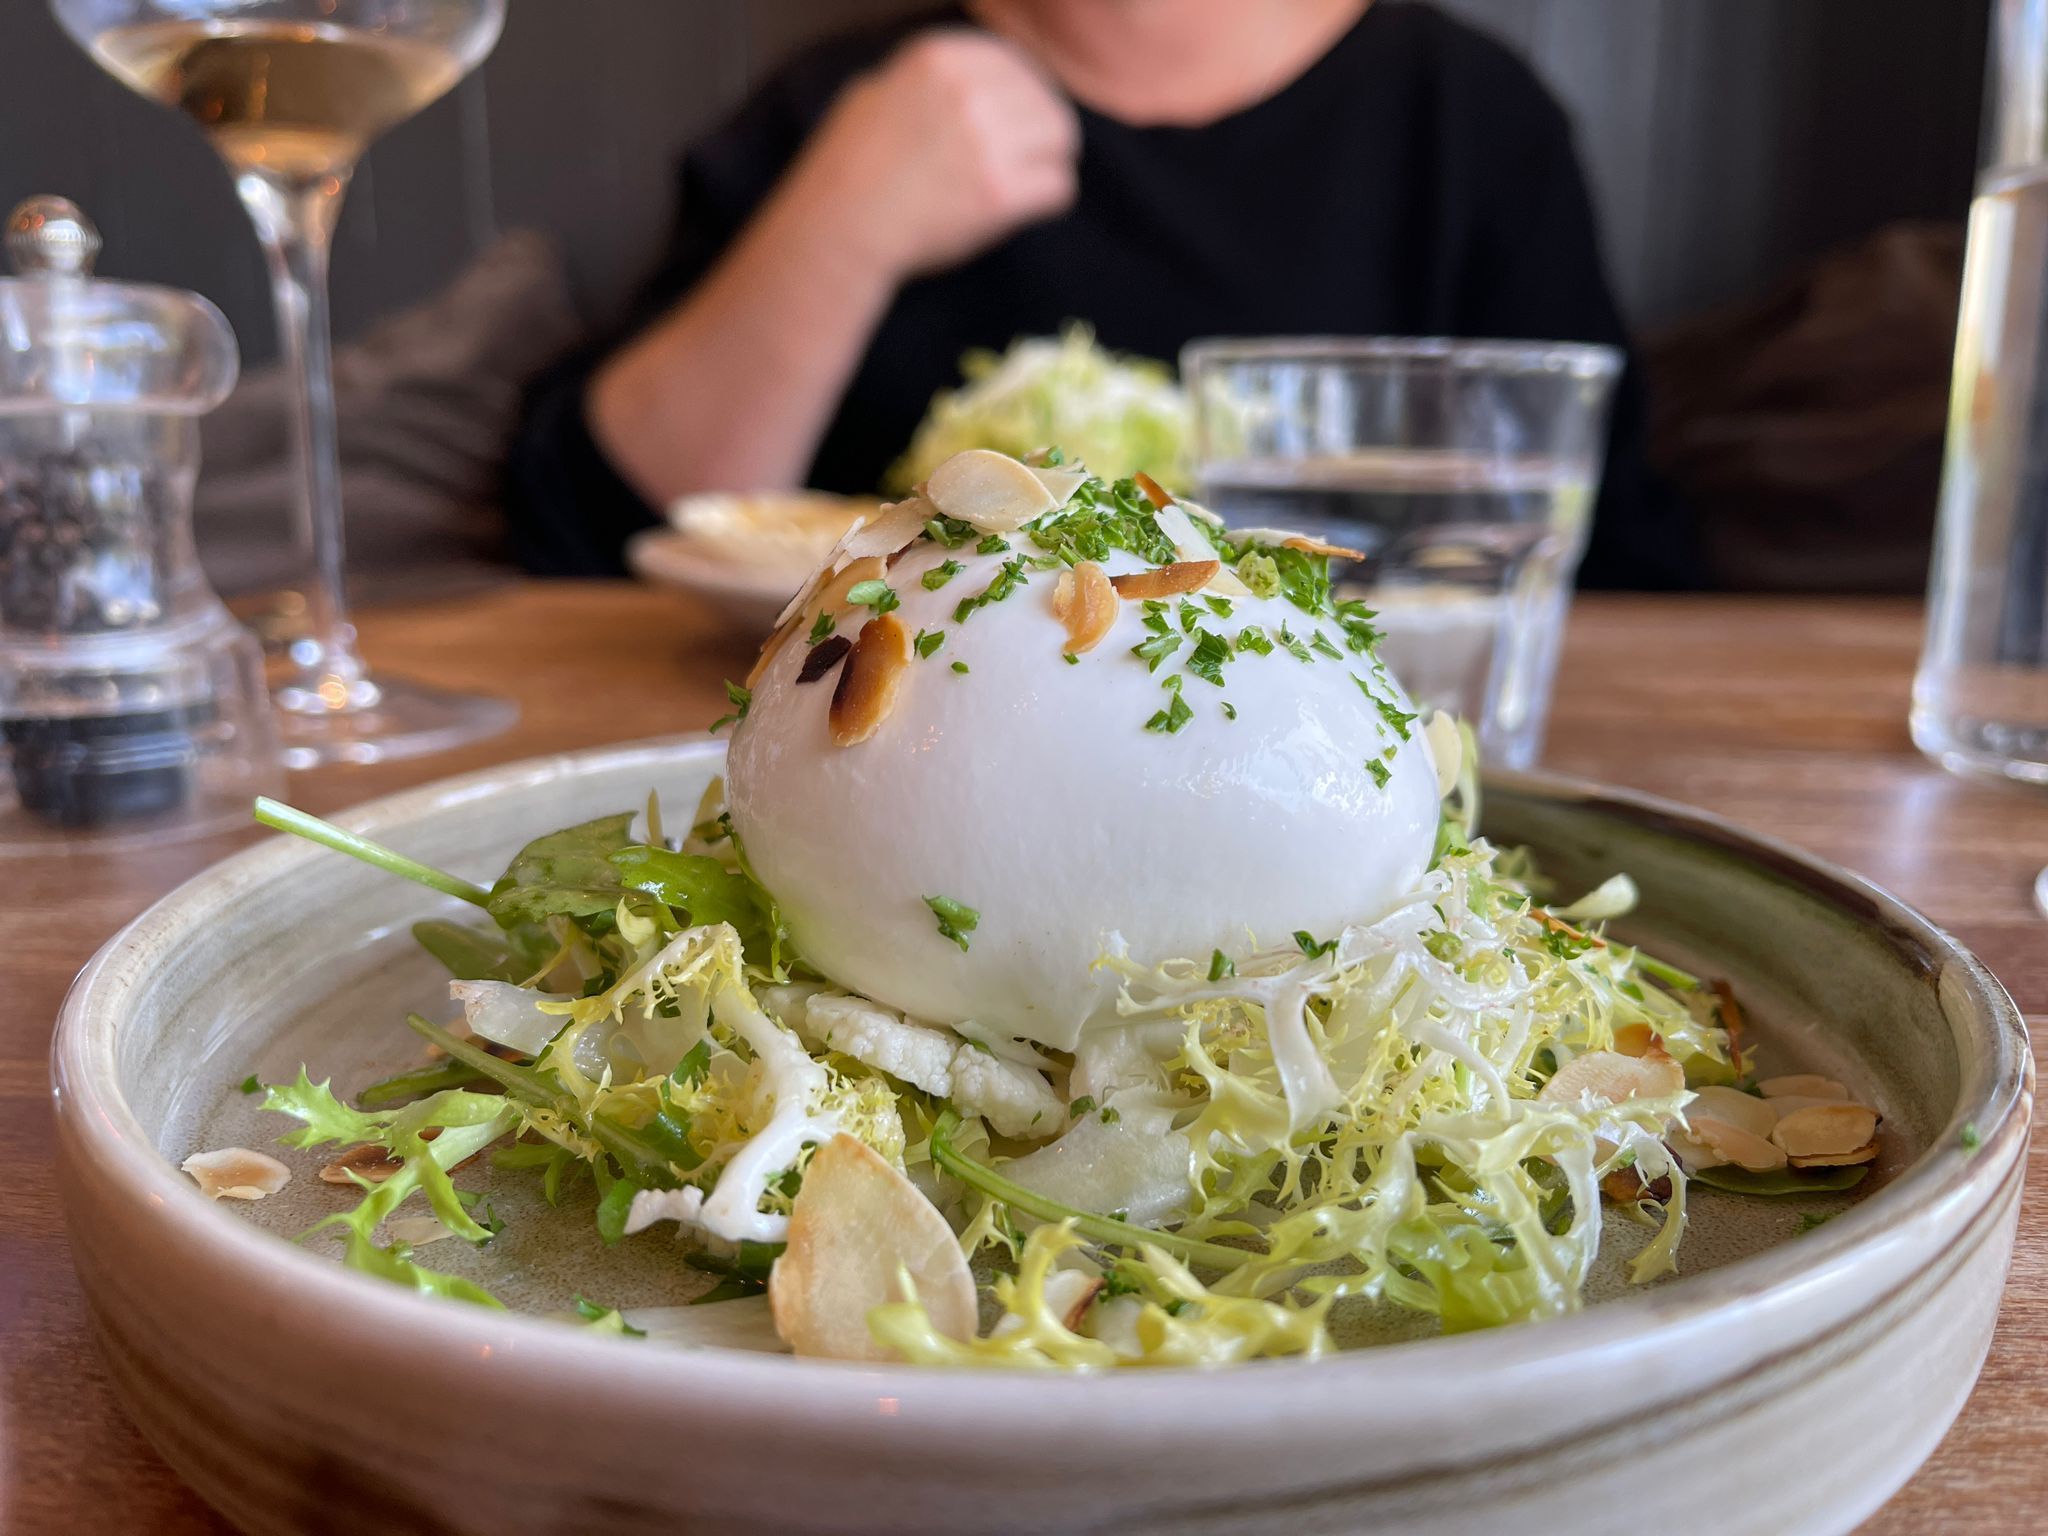 burrata, served on a bed of lightly dressed frisee and fennel, thinly sliced almond, and pickled cauliflower